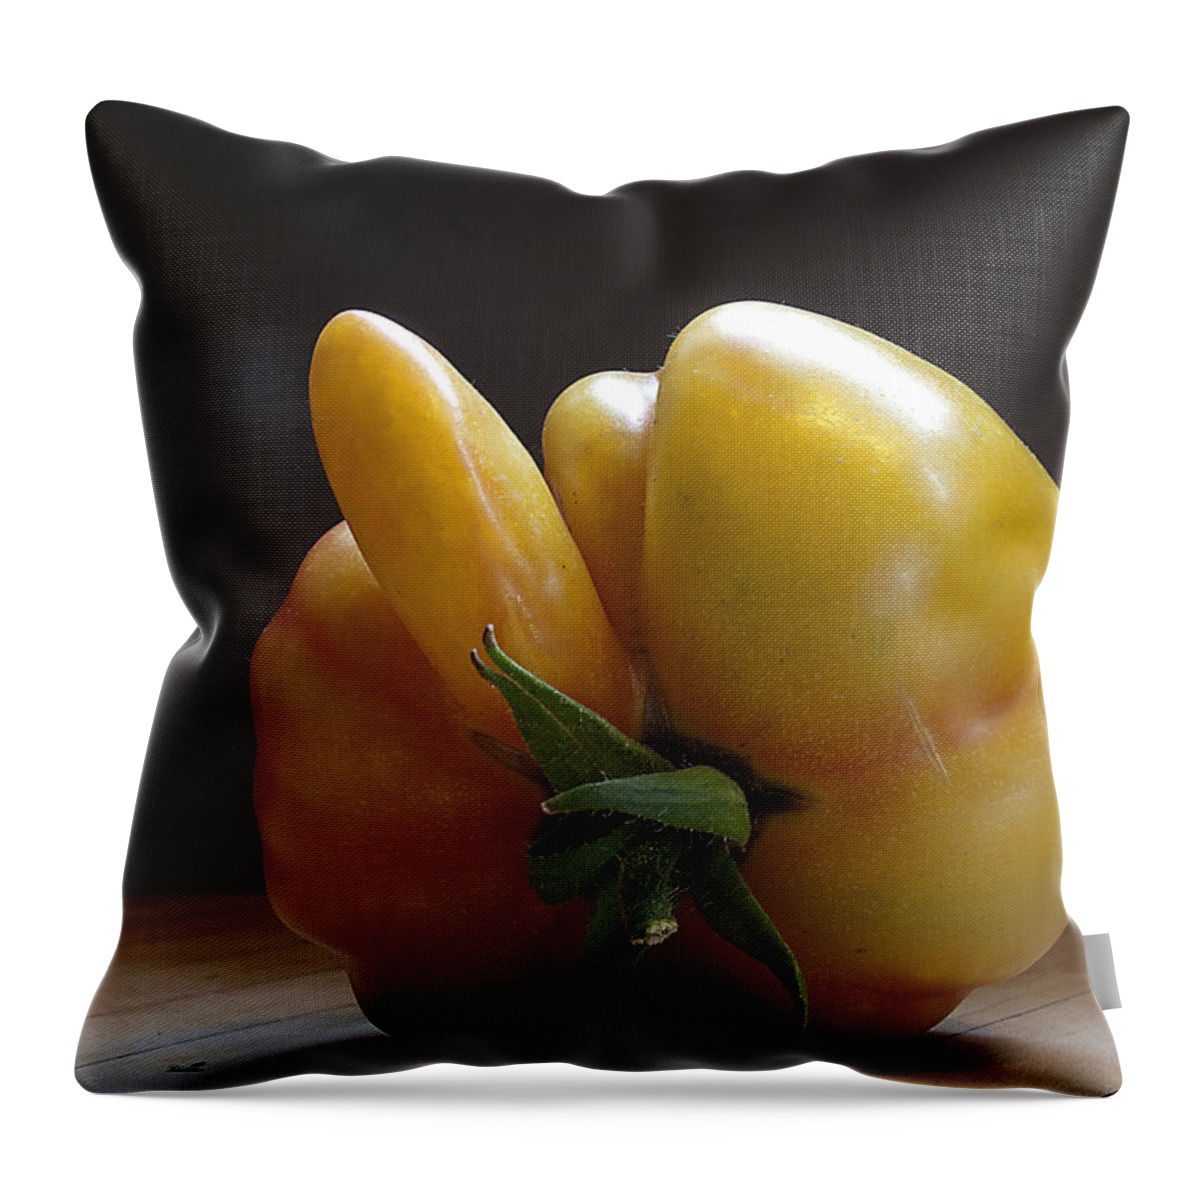 Tomatoes Throw Pillow featuring the photograph Heres What We Think by Joe Schofield